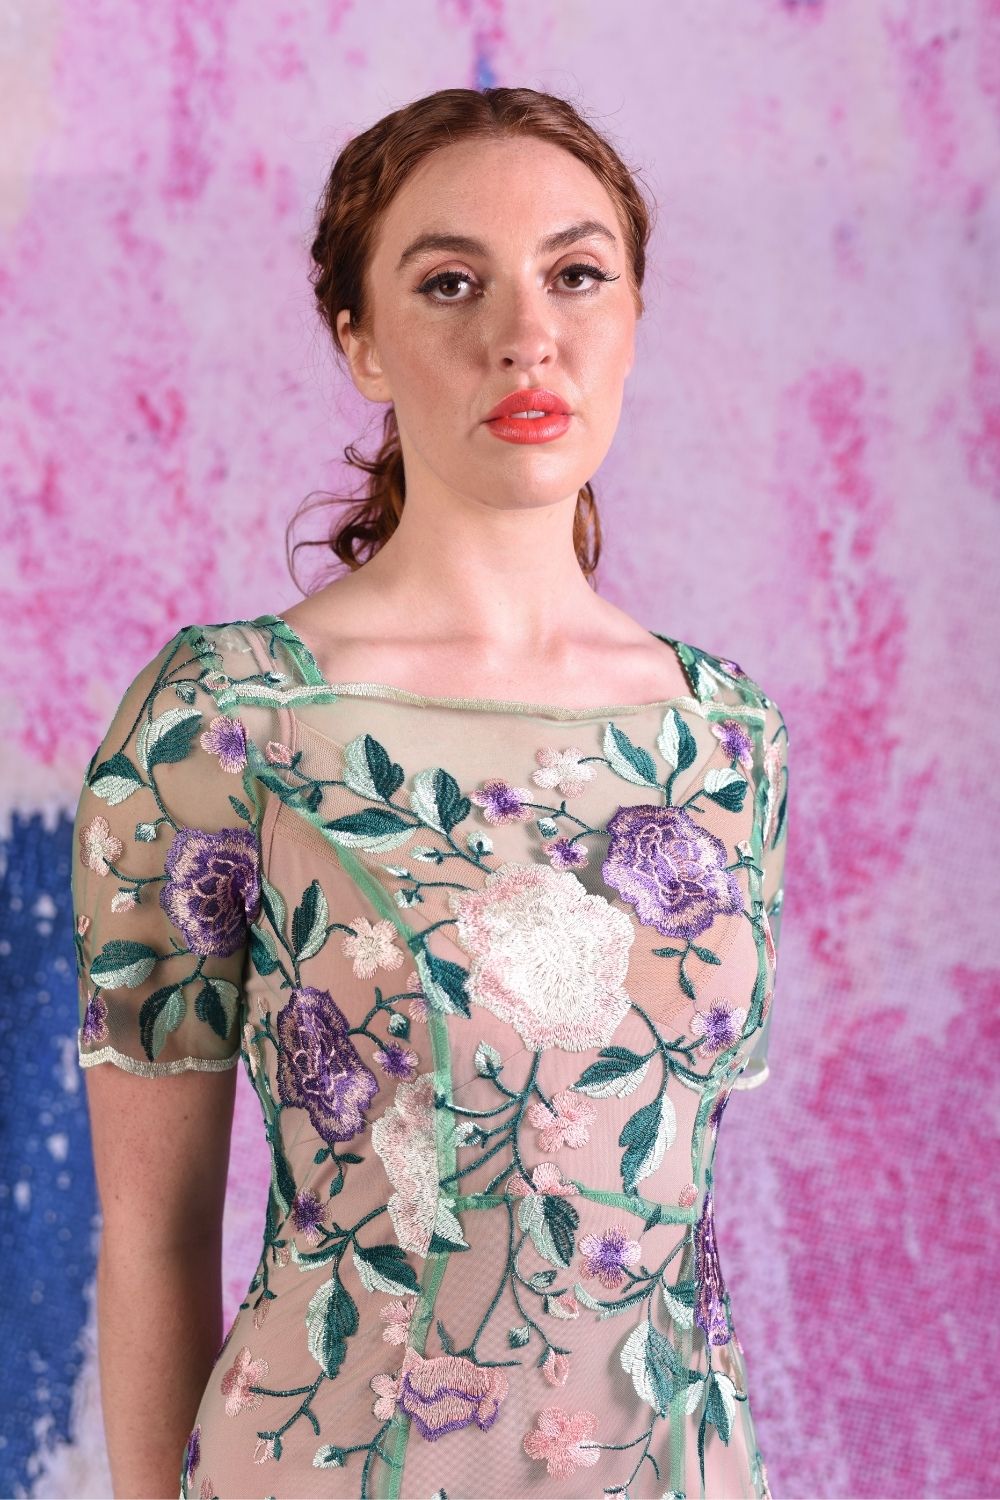 Model in Spring Angel embroidered mesh dress by Annah Stretton